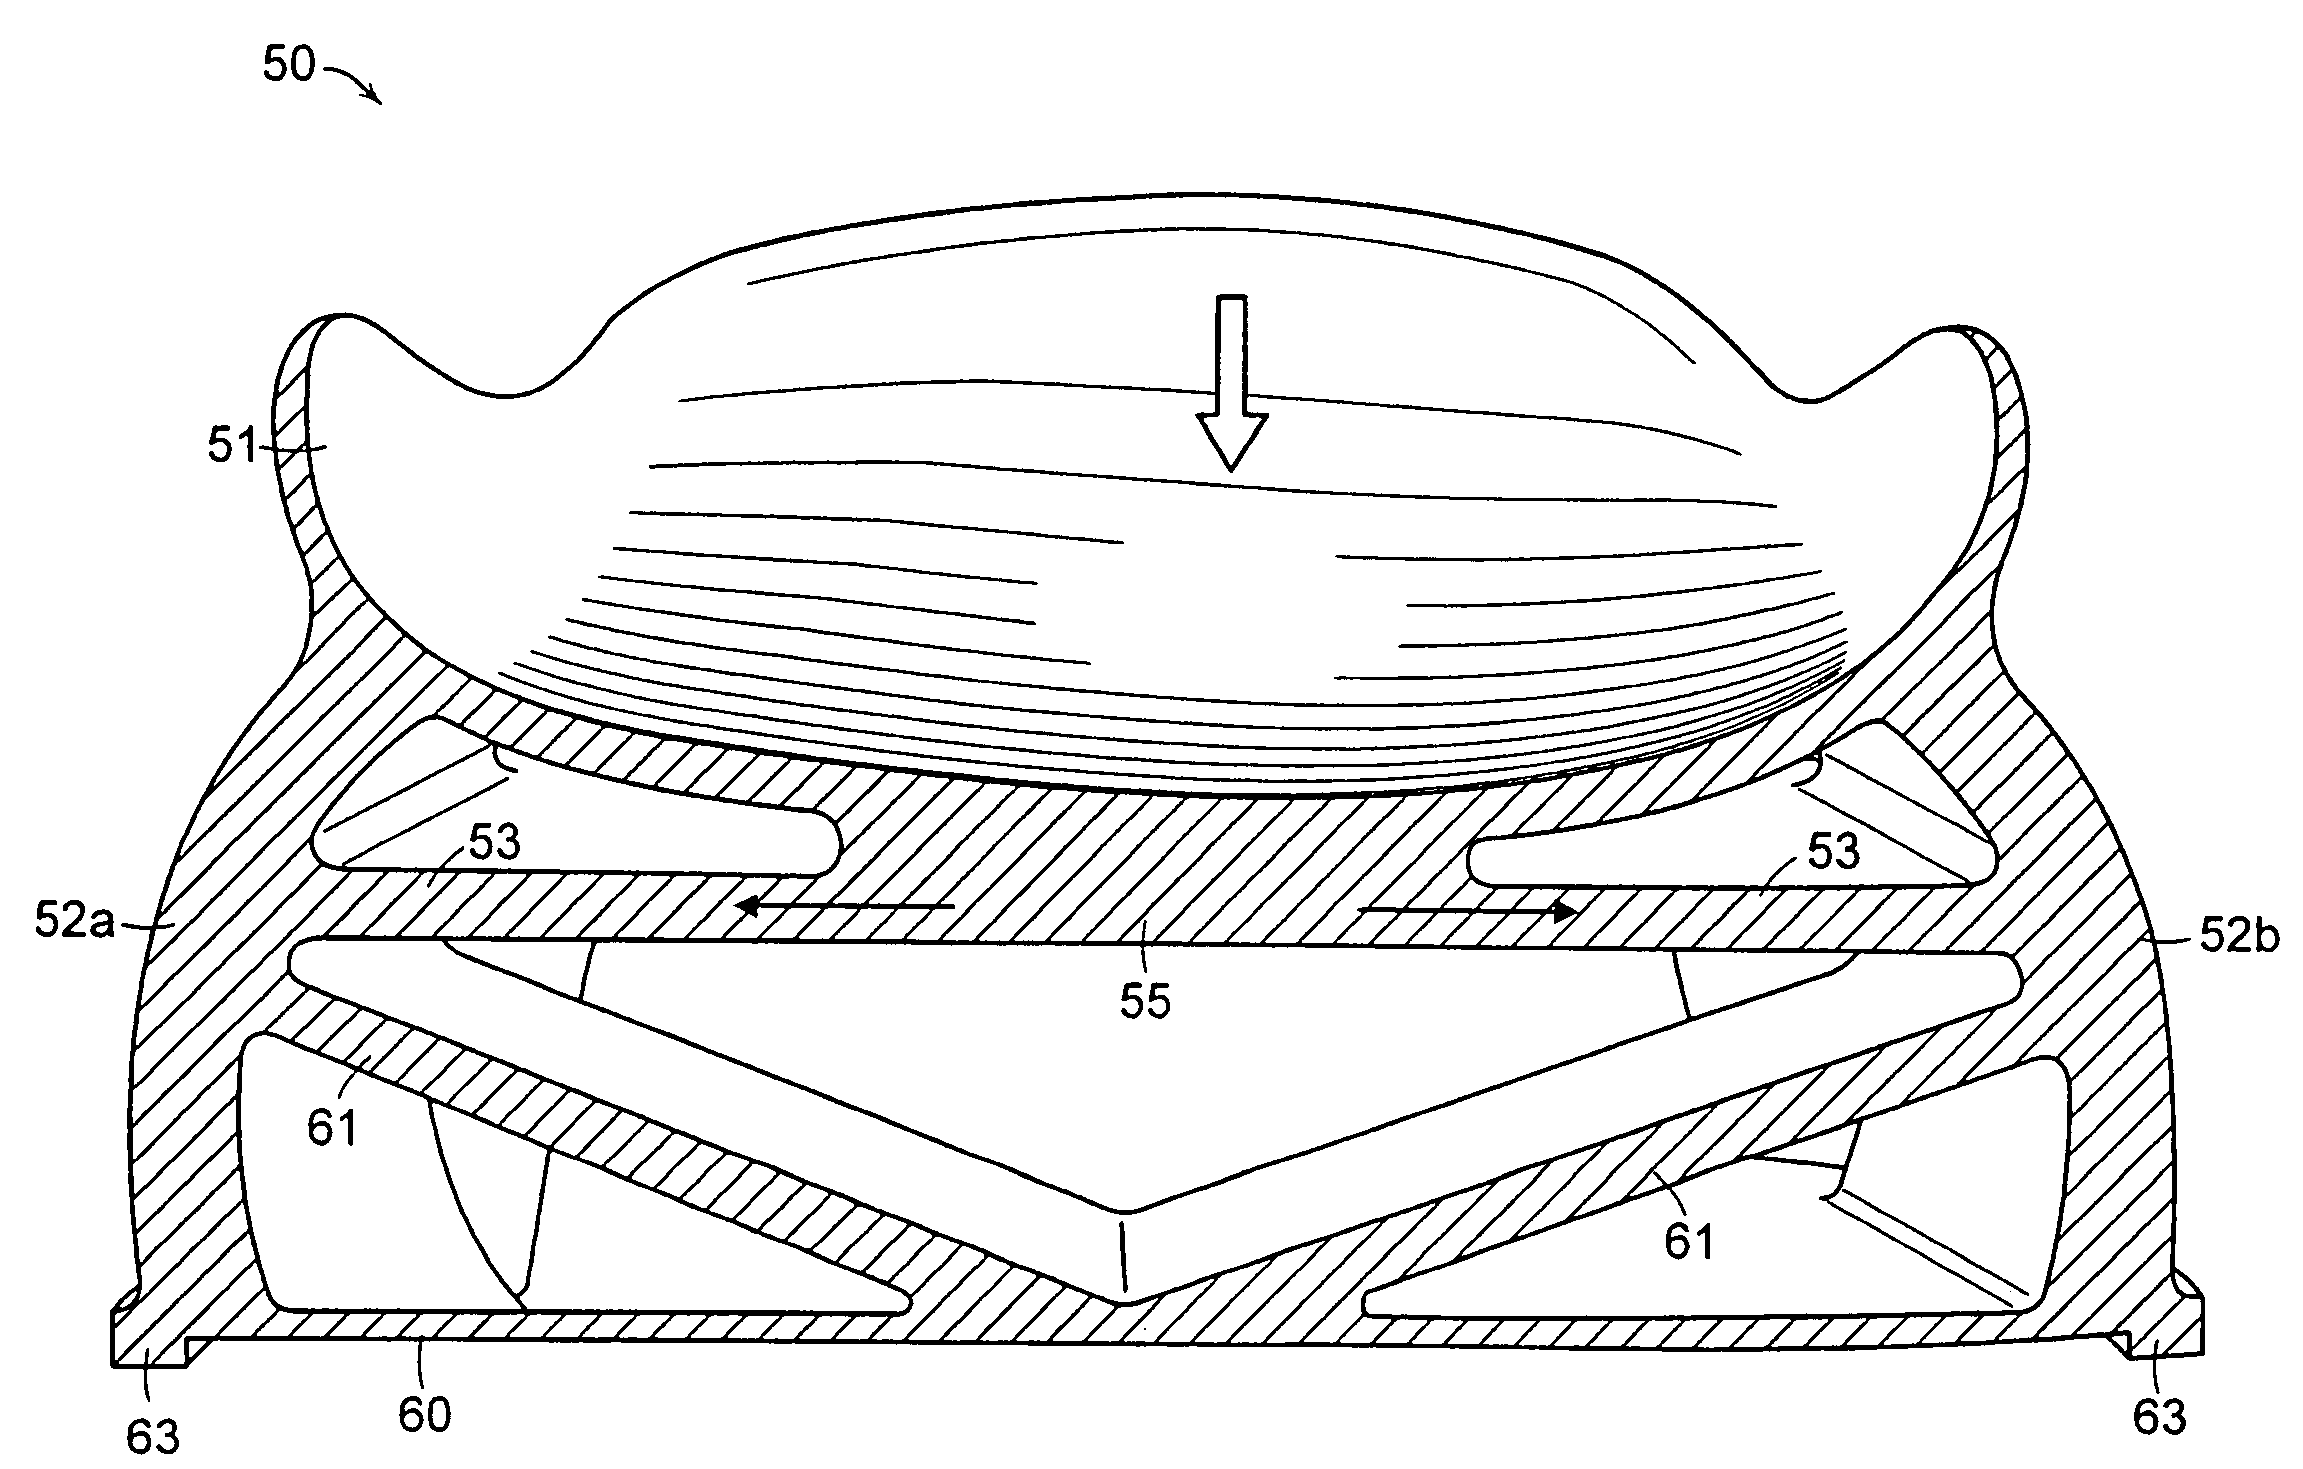 Structural element for a shoe sole